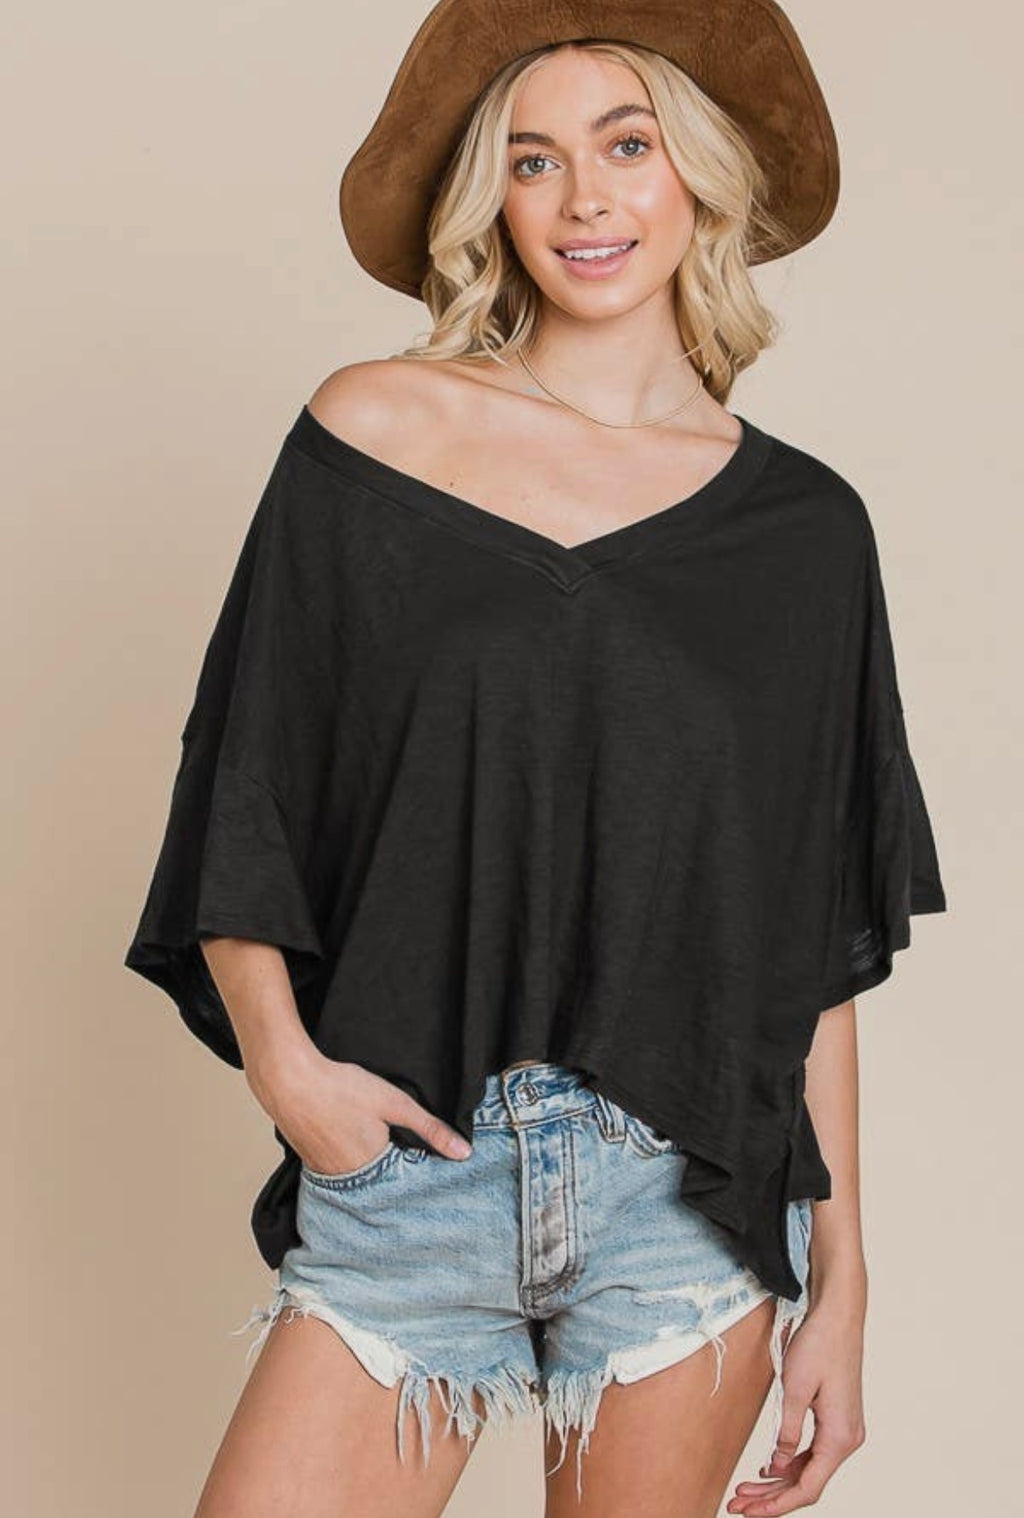 Be comfortable, stylish, and on-trend with our adorable V Neck Top. Crafted from 100% cotton, this essential piece is sure to become your go-to in any wardrobe. With its flattering v-neckline and versatile design, you'll love this cute, staple piece!